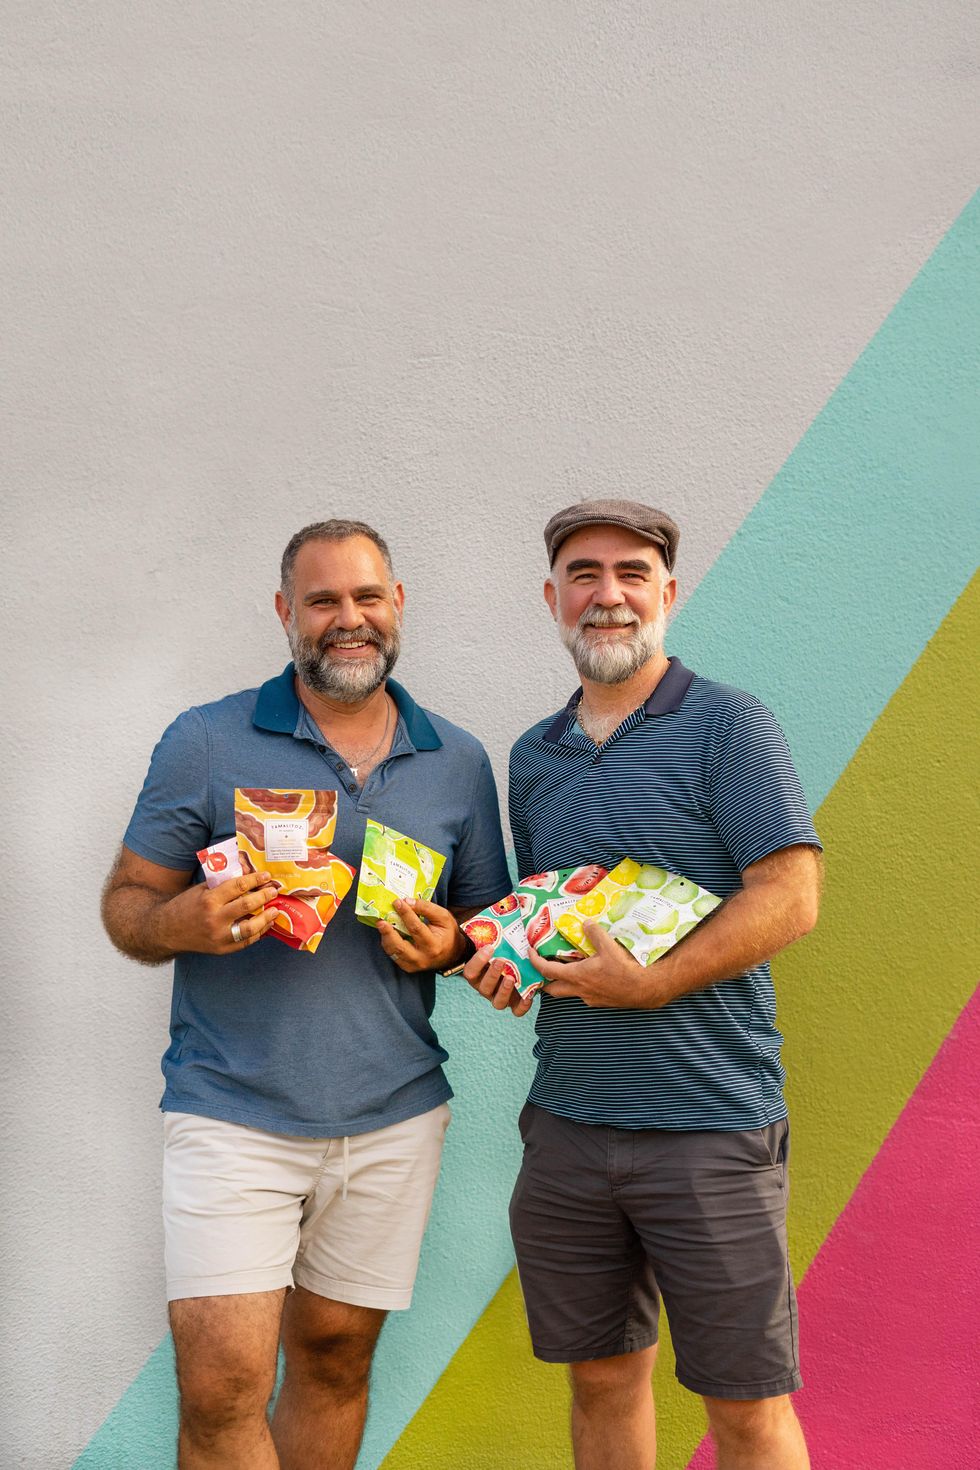 Austin-based Tamalitoz founders holding candy packages.